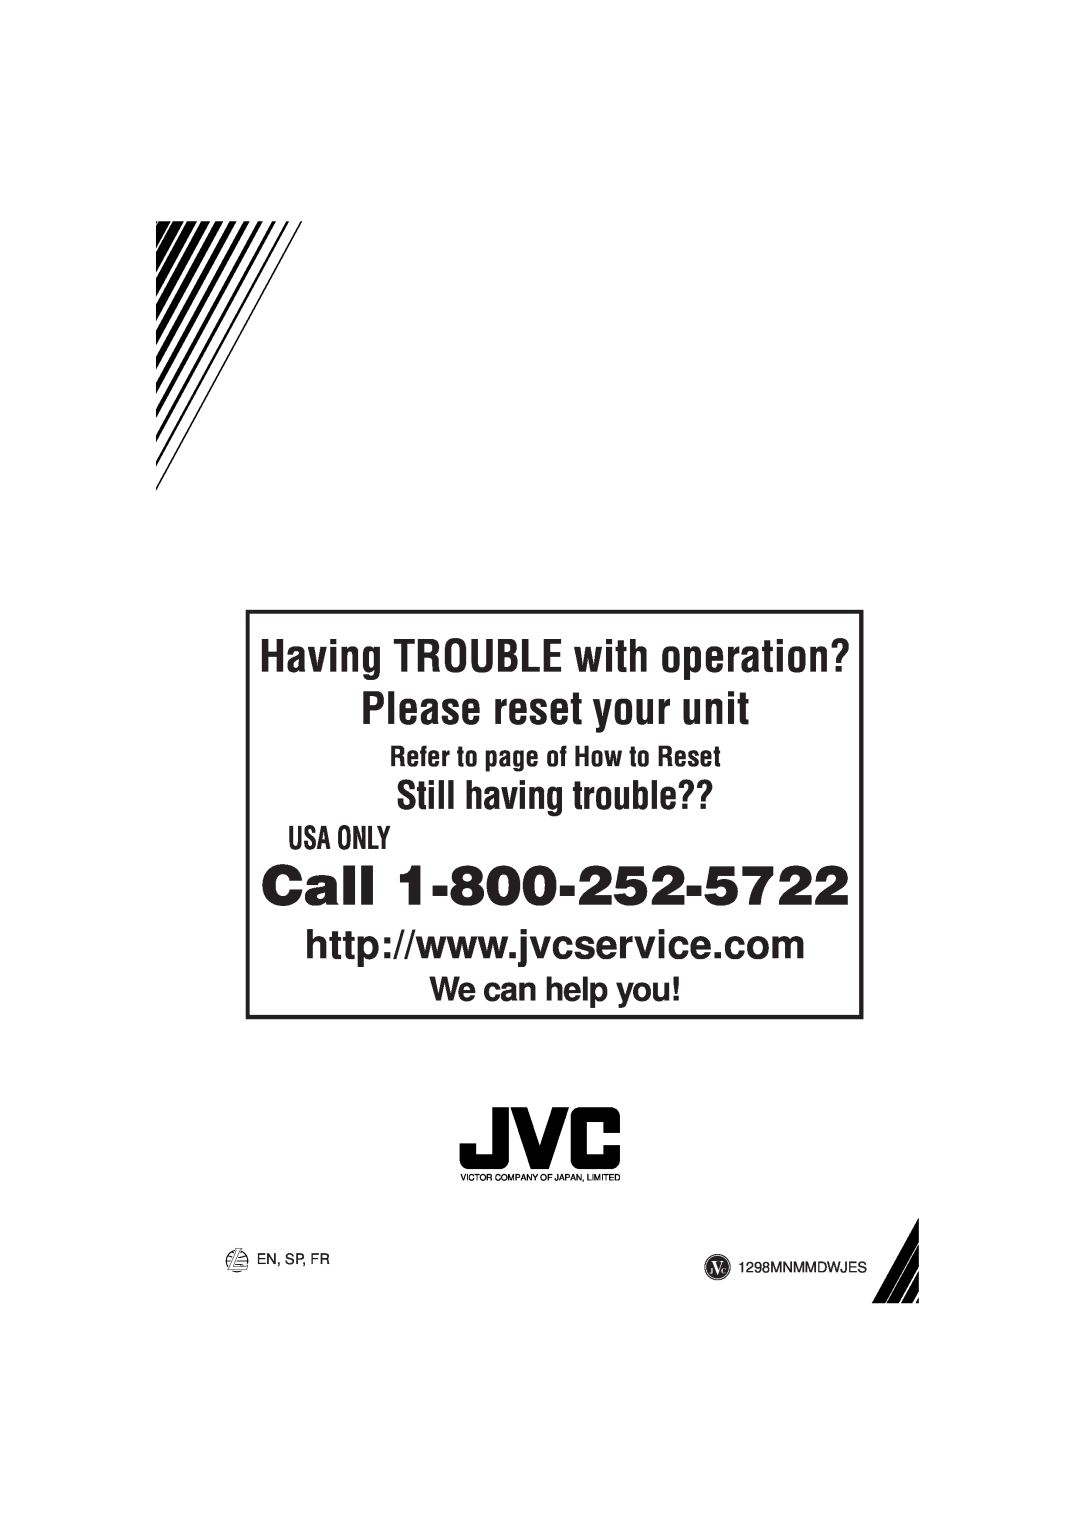 JVC KD-SX949 Refer to page of How to Reset, Call, Please reset your unit, Having TROUBLE with operation?, We can help you 